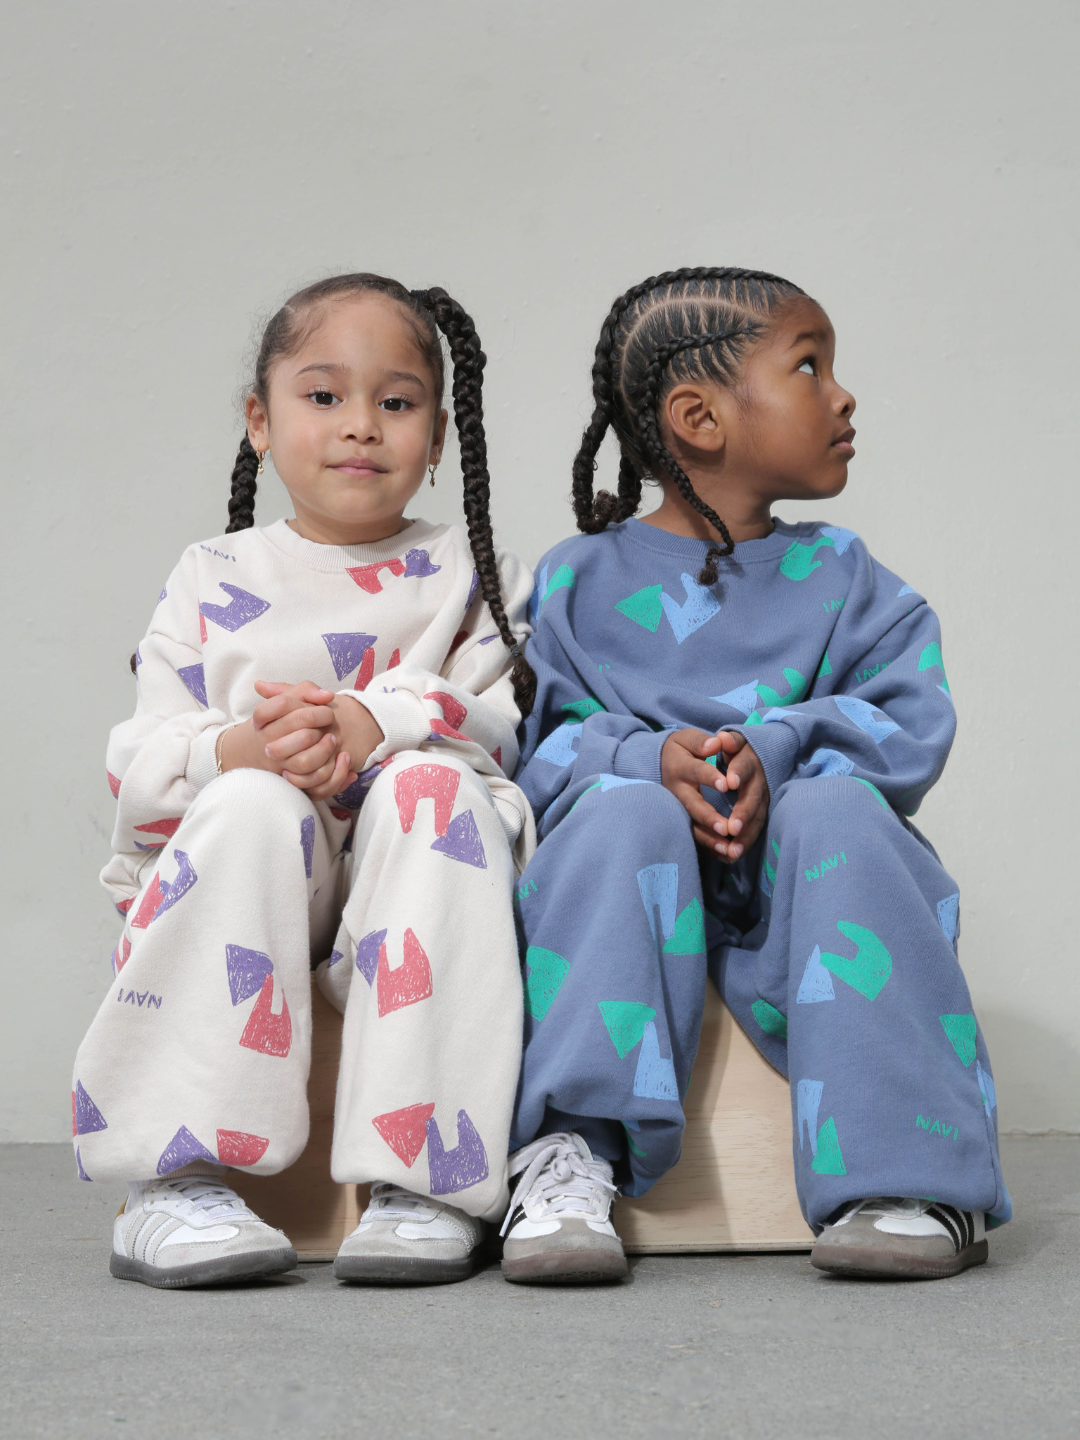 Child wearing blue sweatpants with an all over pattern of green and blue shapes and the brand name Navi, with matching crewneck sweatshirt. He sits on a wooden box against a grey background, next to another child in the same outfit in the oatmeal colorway.